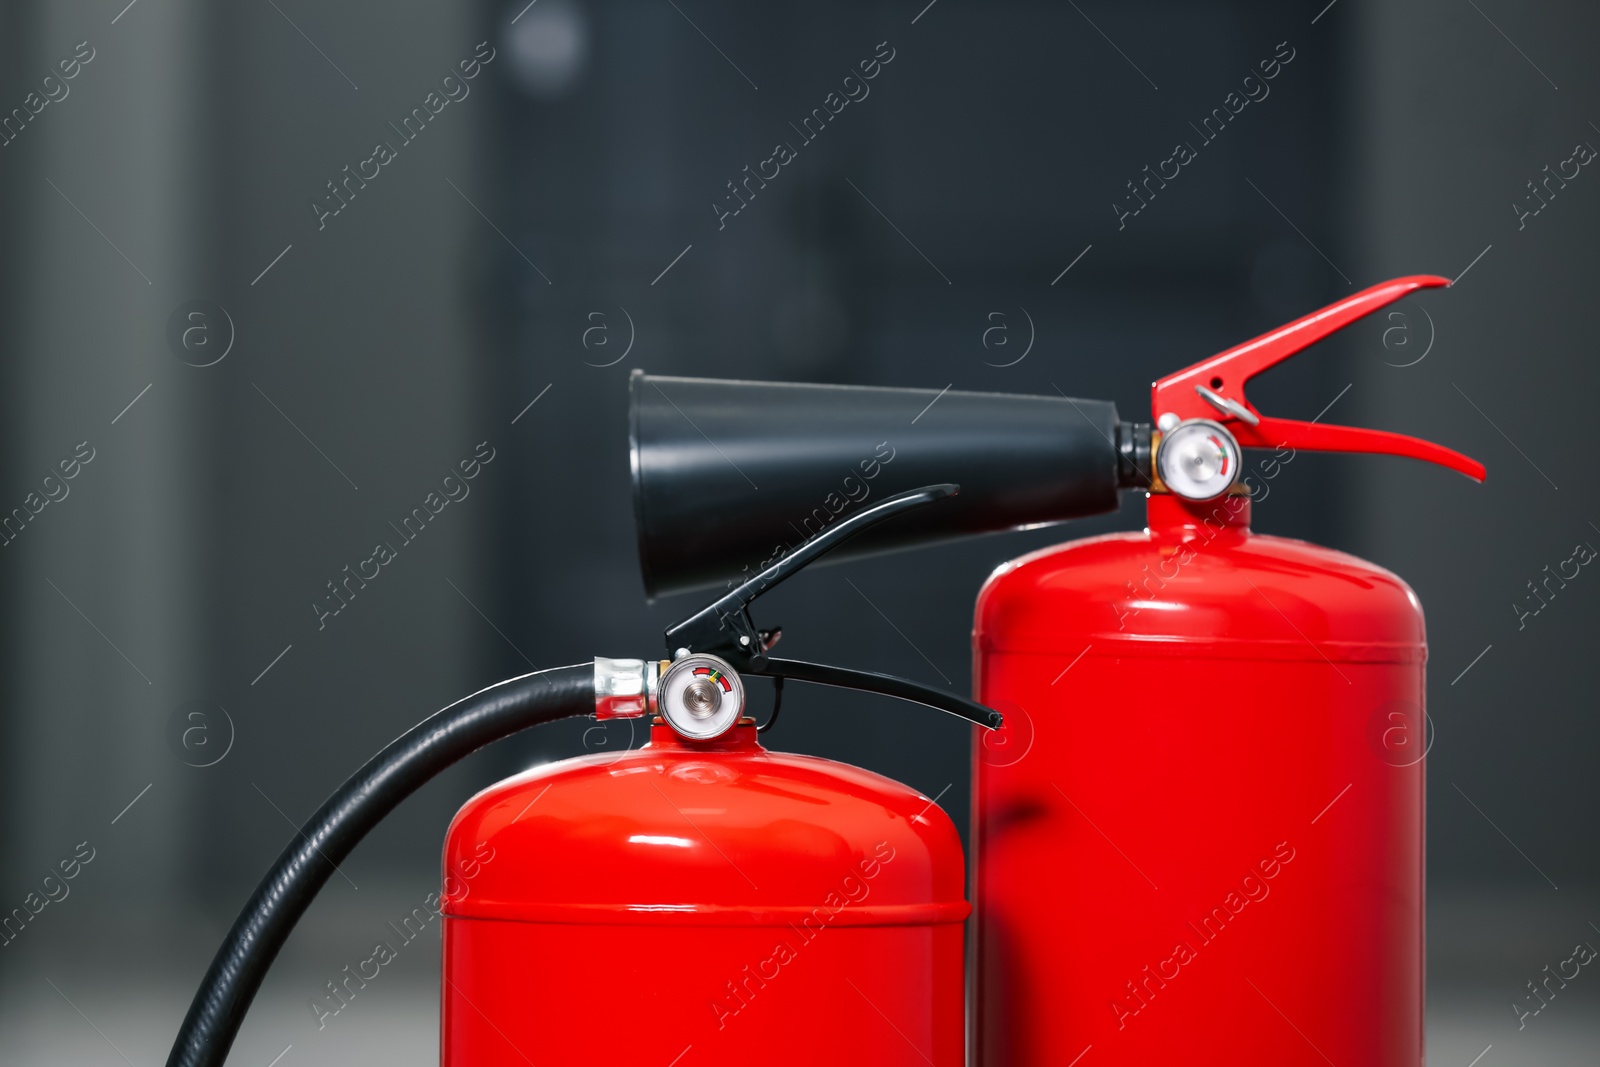 Photo of Two red fire extinguishers in hall, closeup view